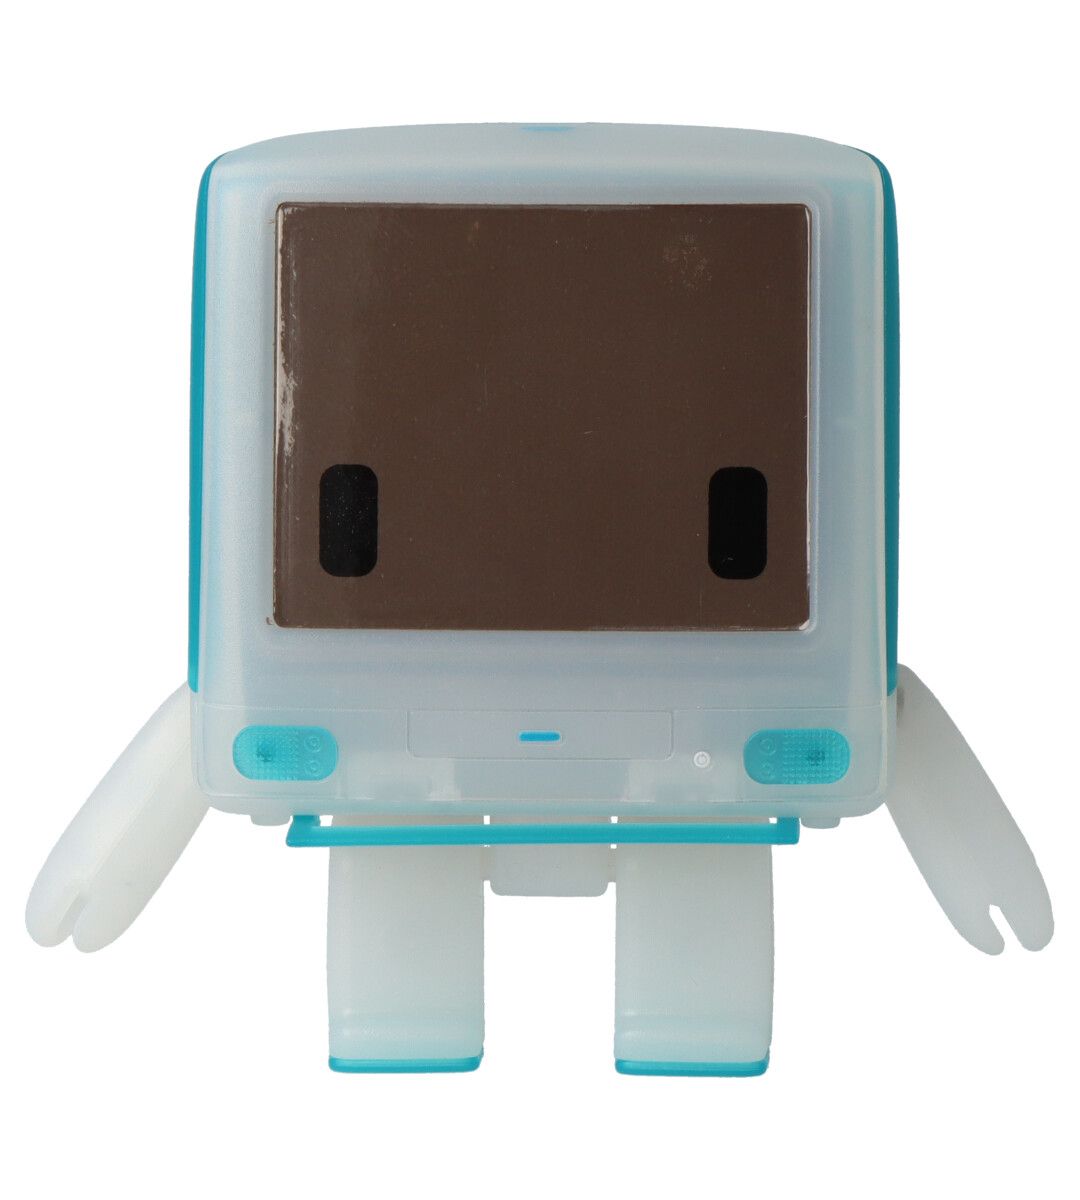 Classicbot iBot G3